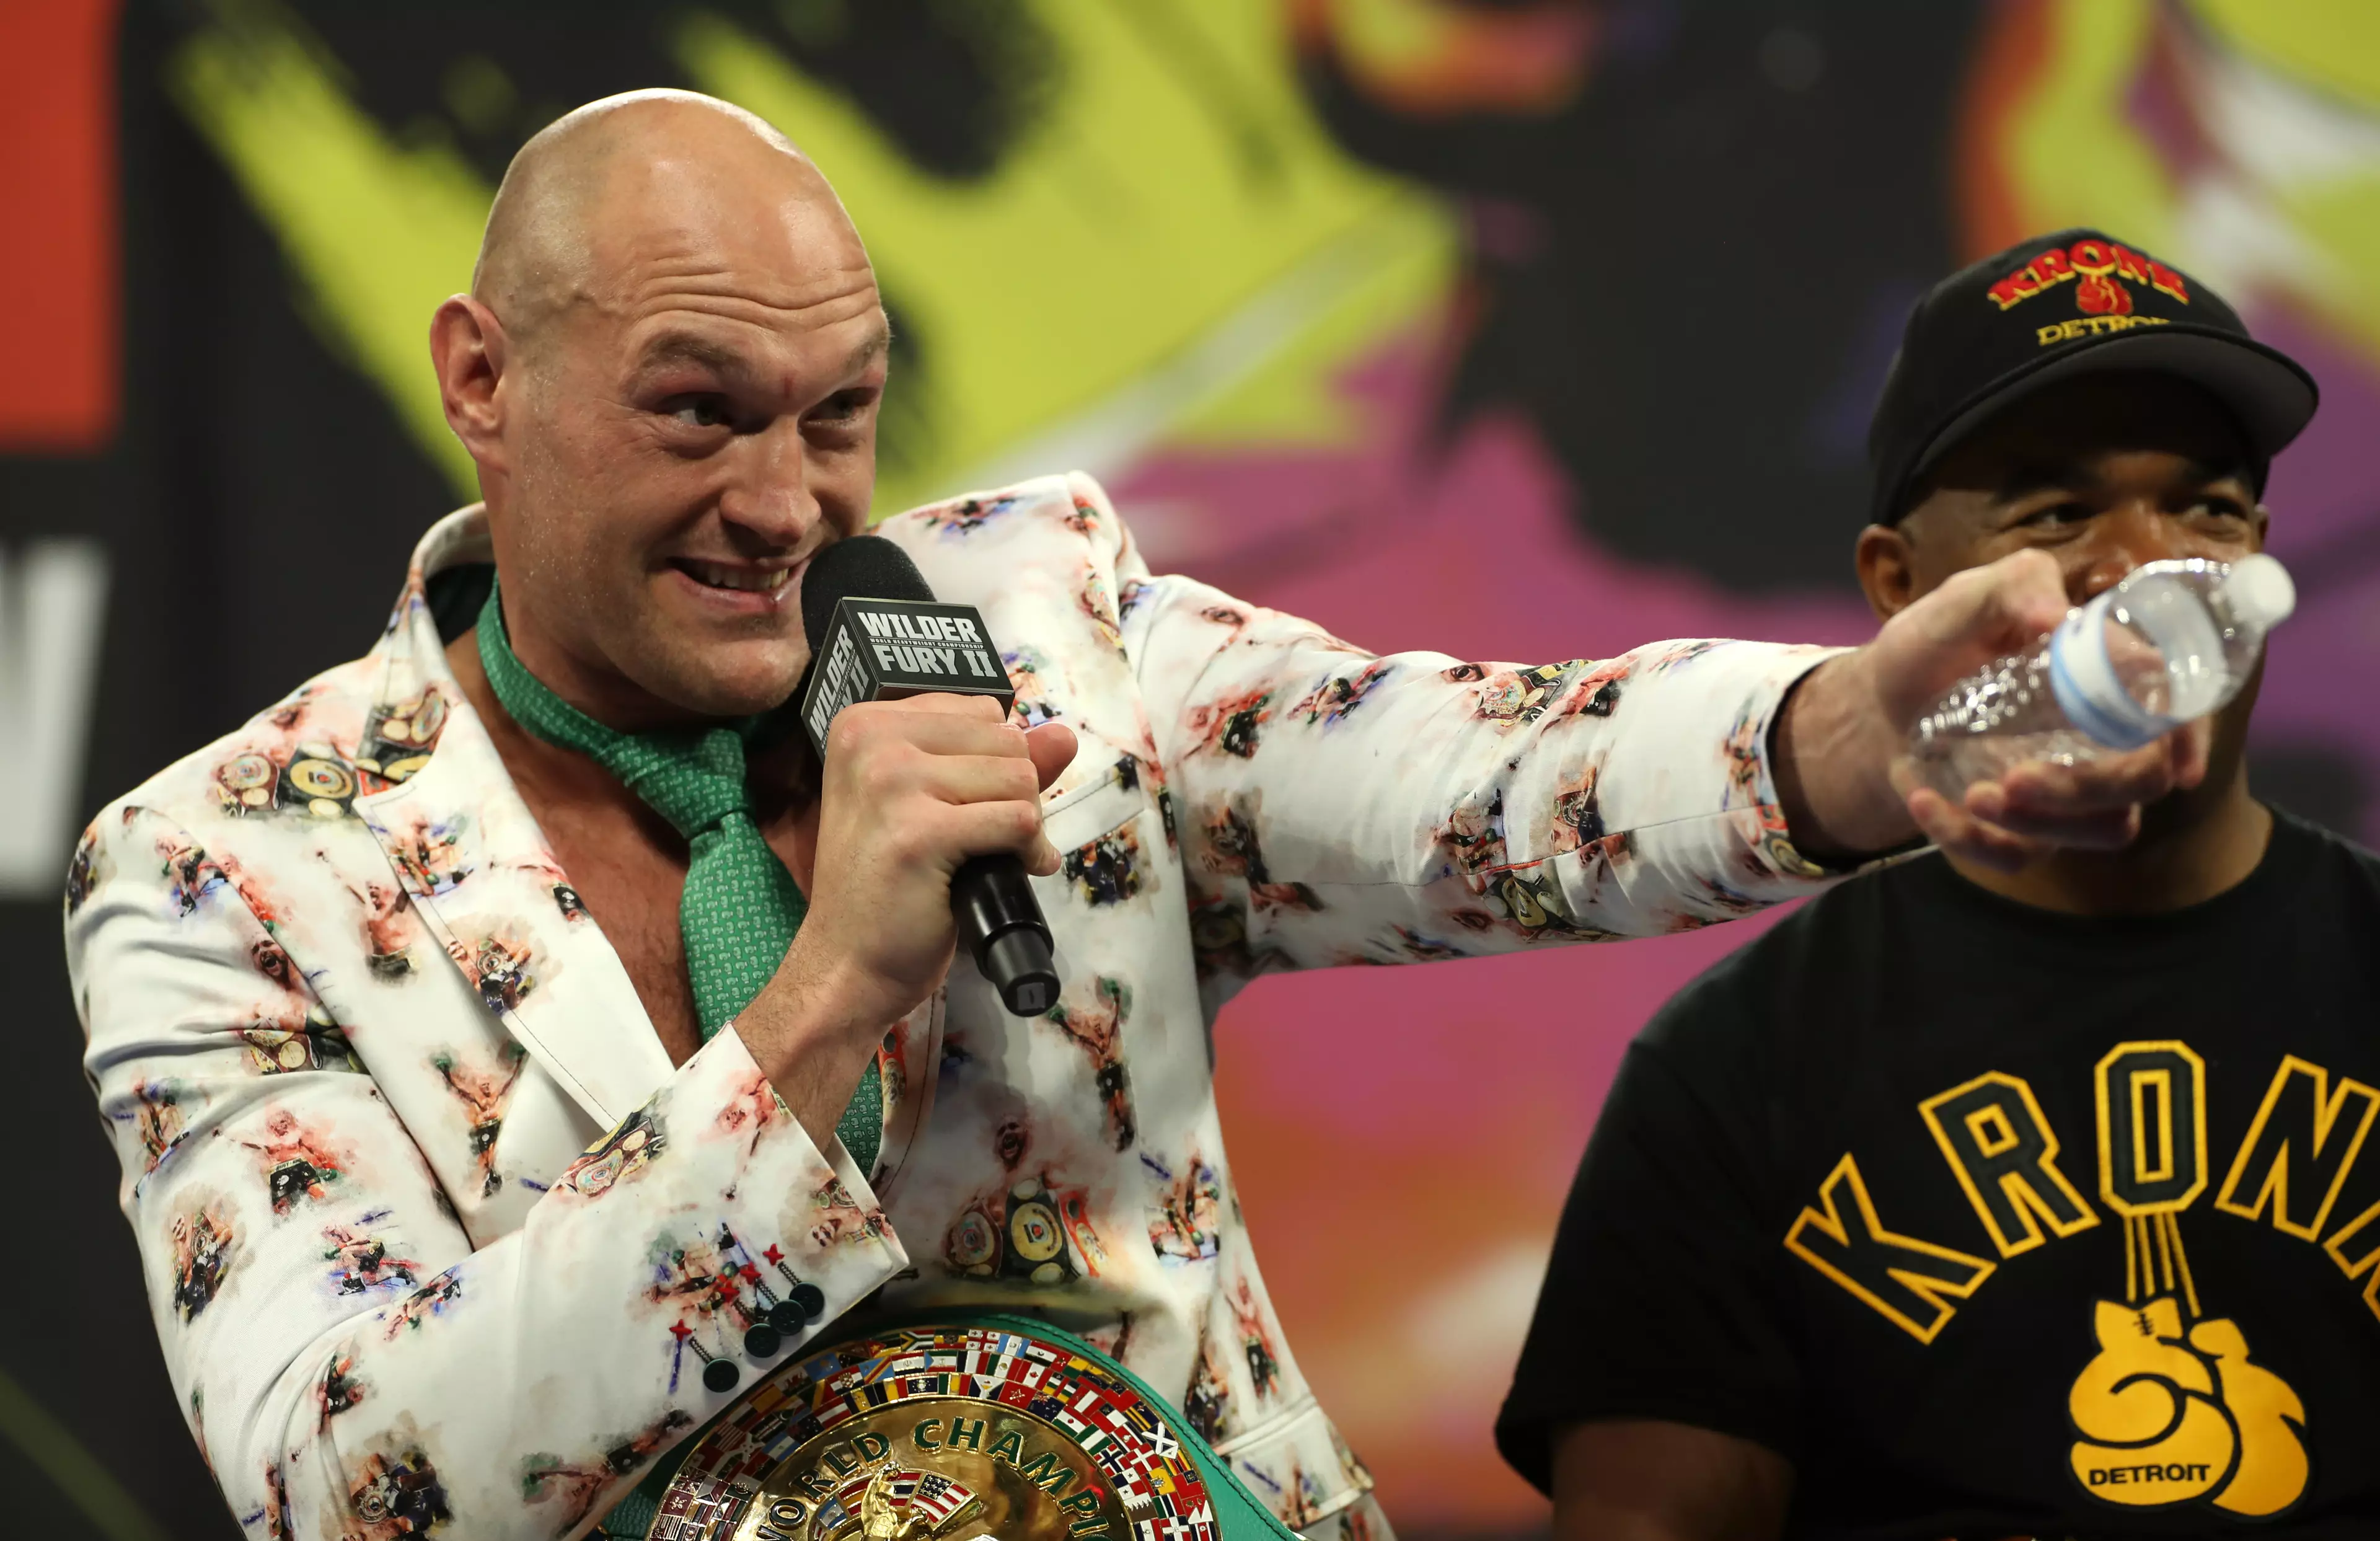 Tyson Fury after defeating Deontay Wilder and becoming WBC heavyweight champion.